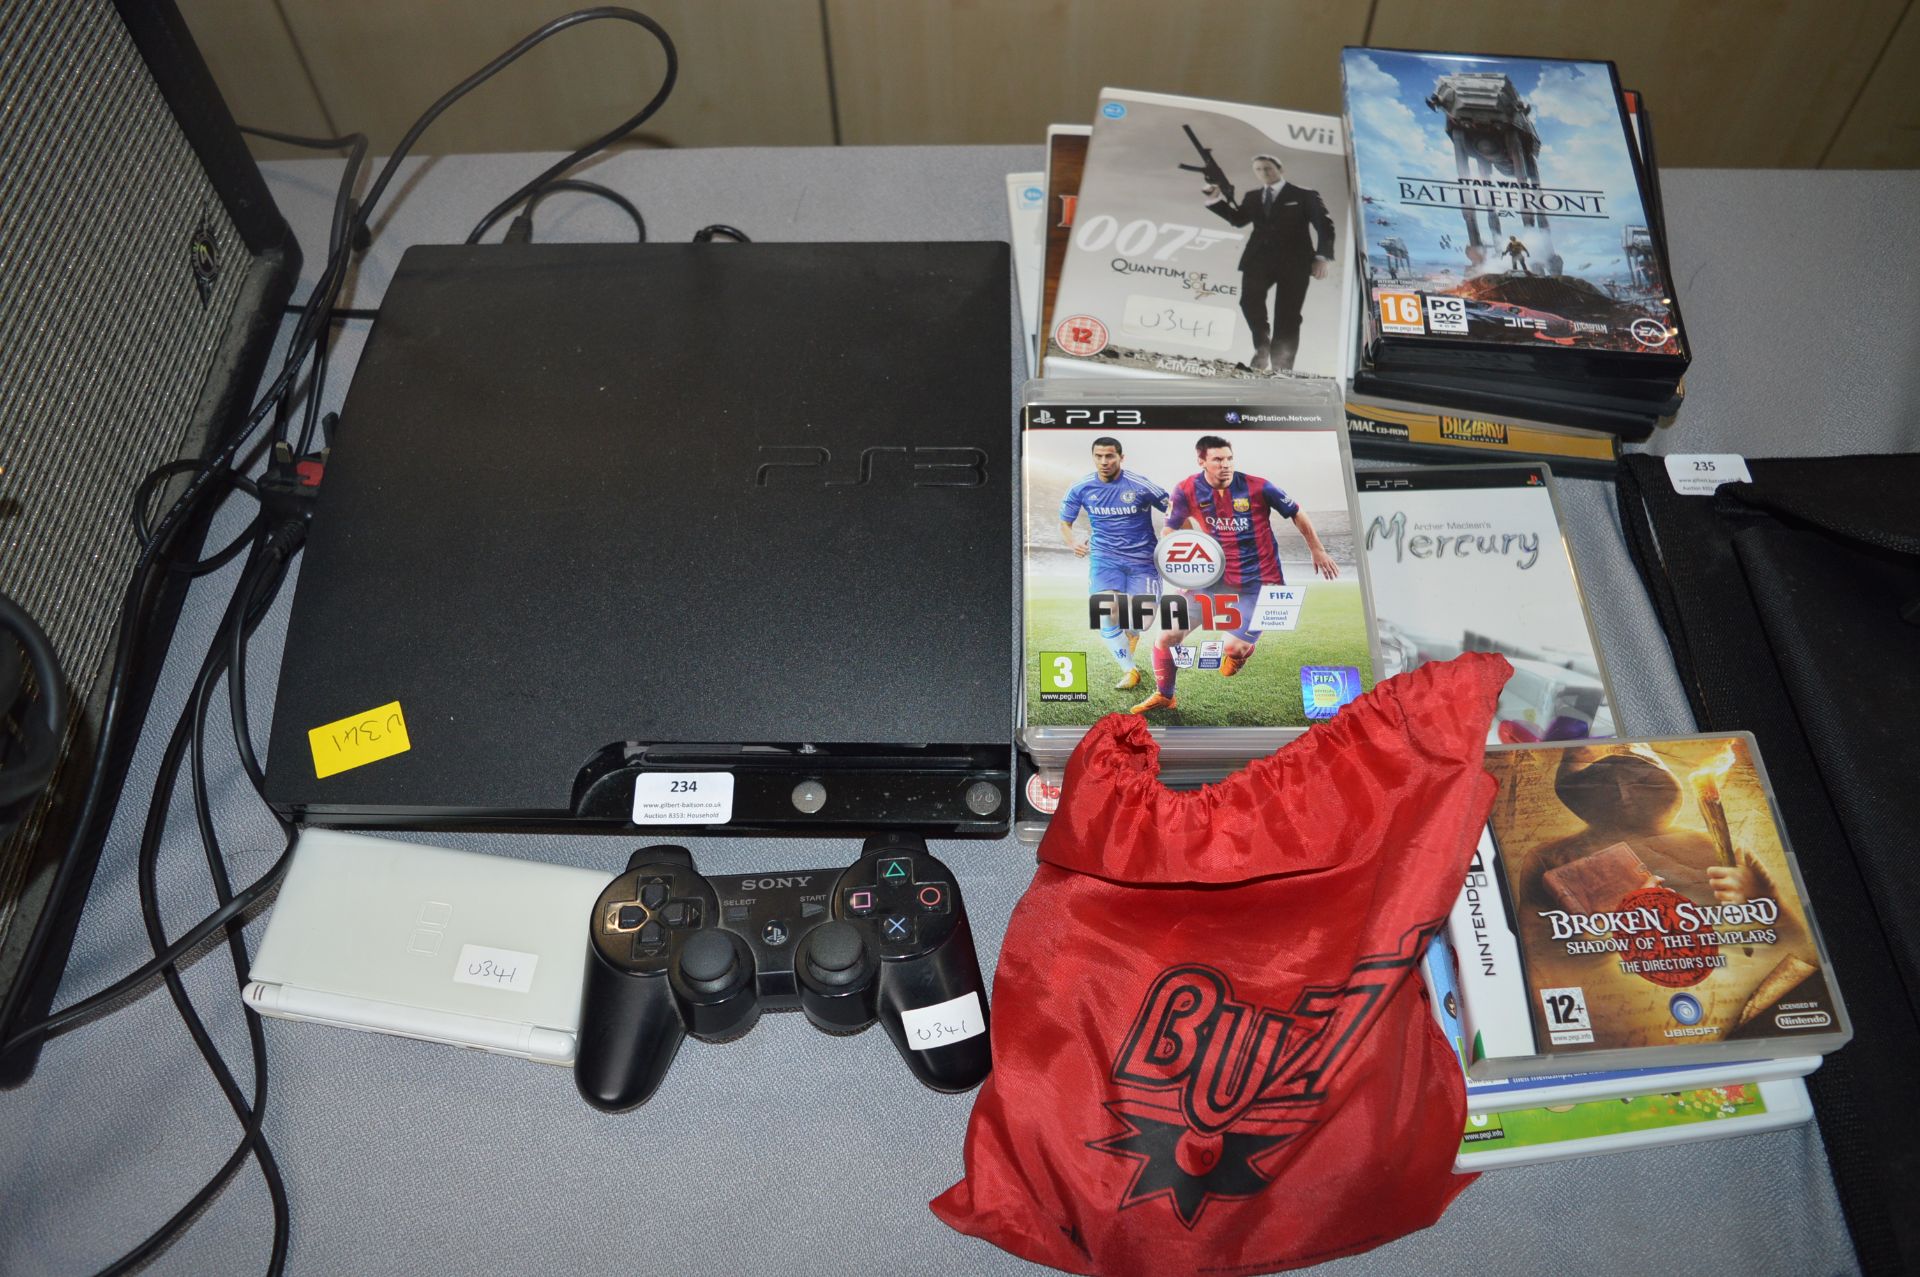 PlayStation 3, Nintendo DS Lite, and Assorted Game